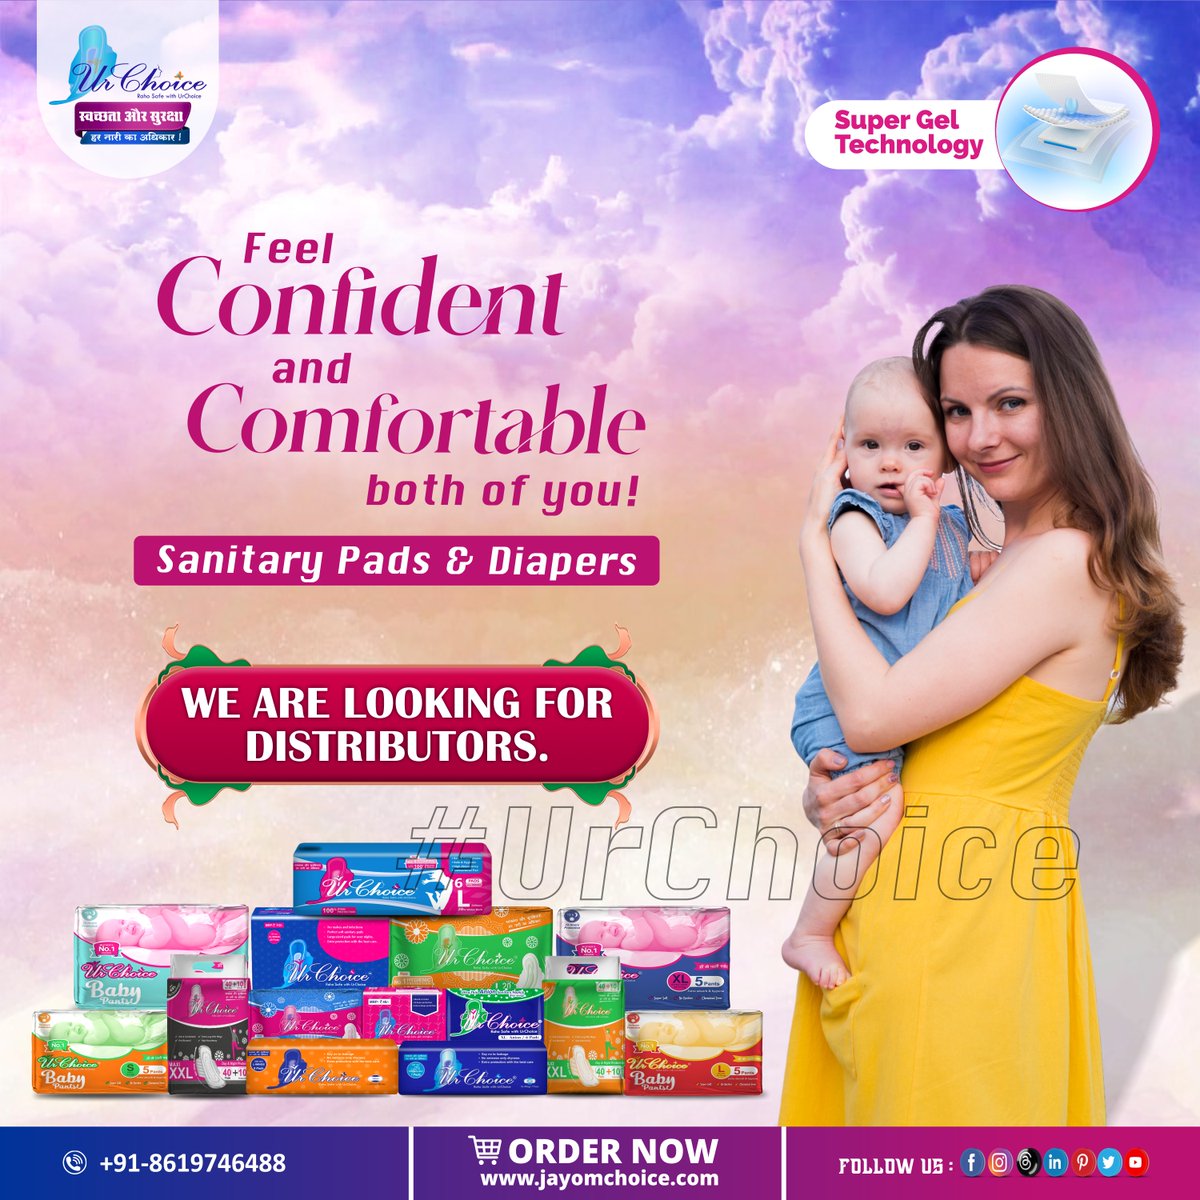 Experience All-Day Comfort and Protection for You and Your Baby. Because Every Day Should Feel This Good.
***WE ARE LOOKING FOR DISTRIBUTORS***
Order Now: jayomchoice.com
#StayPrepared #urchoice #confidentwomen #distributor #leakagefree #comfort #SanitaryPads #DishaPatani